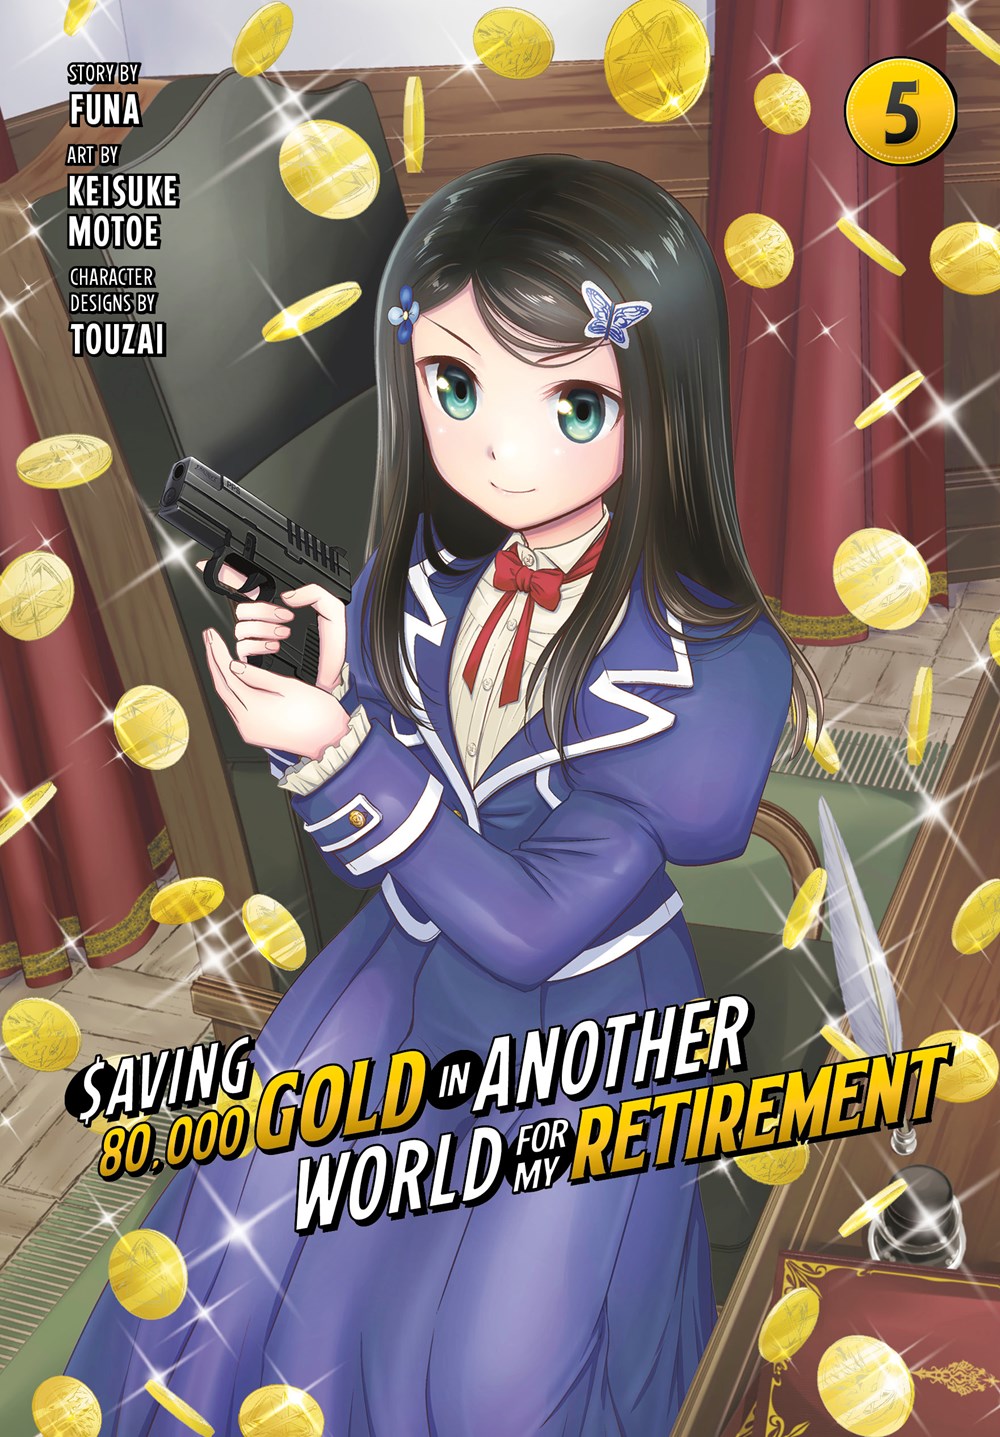 Saving 80,000 Gold In Another World For my Retirement